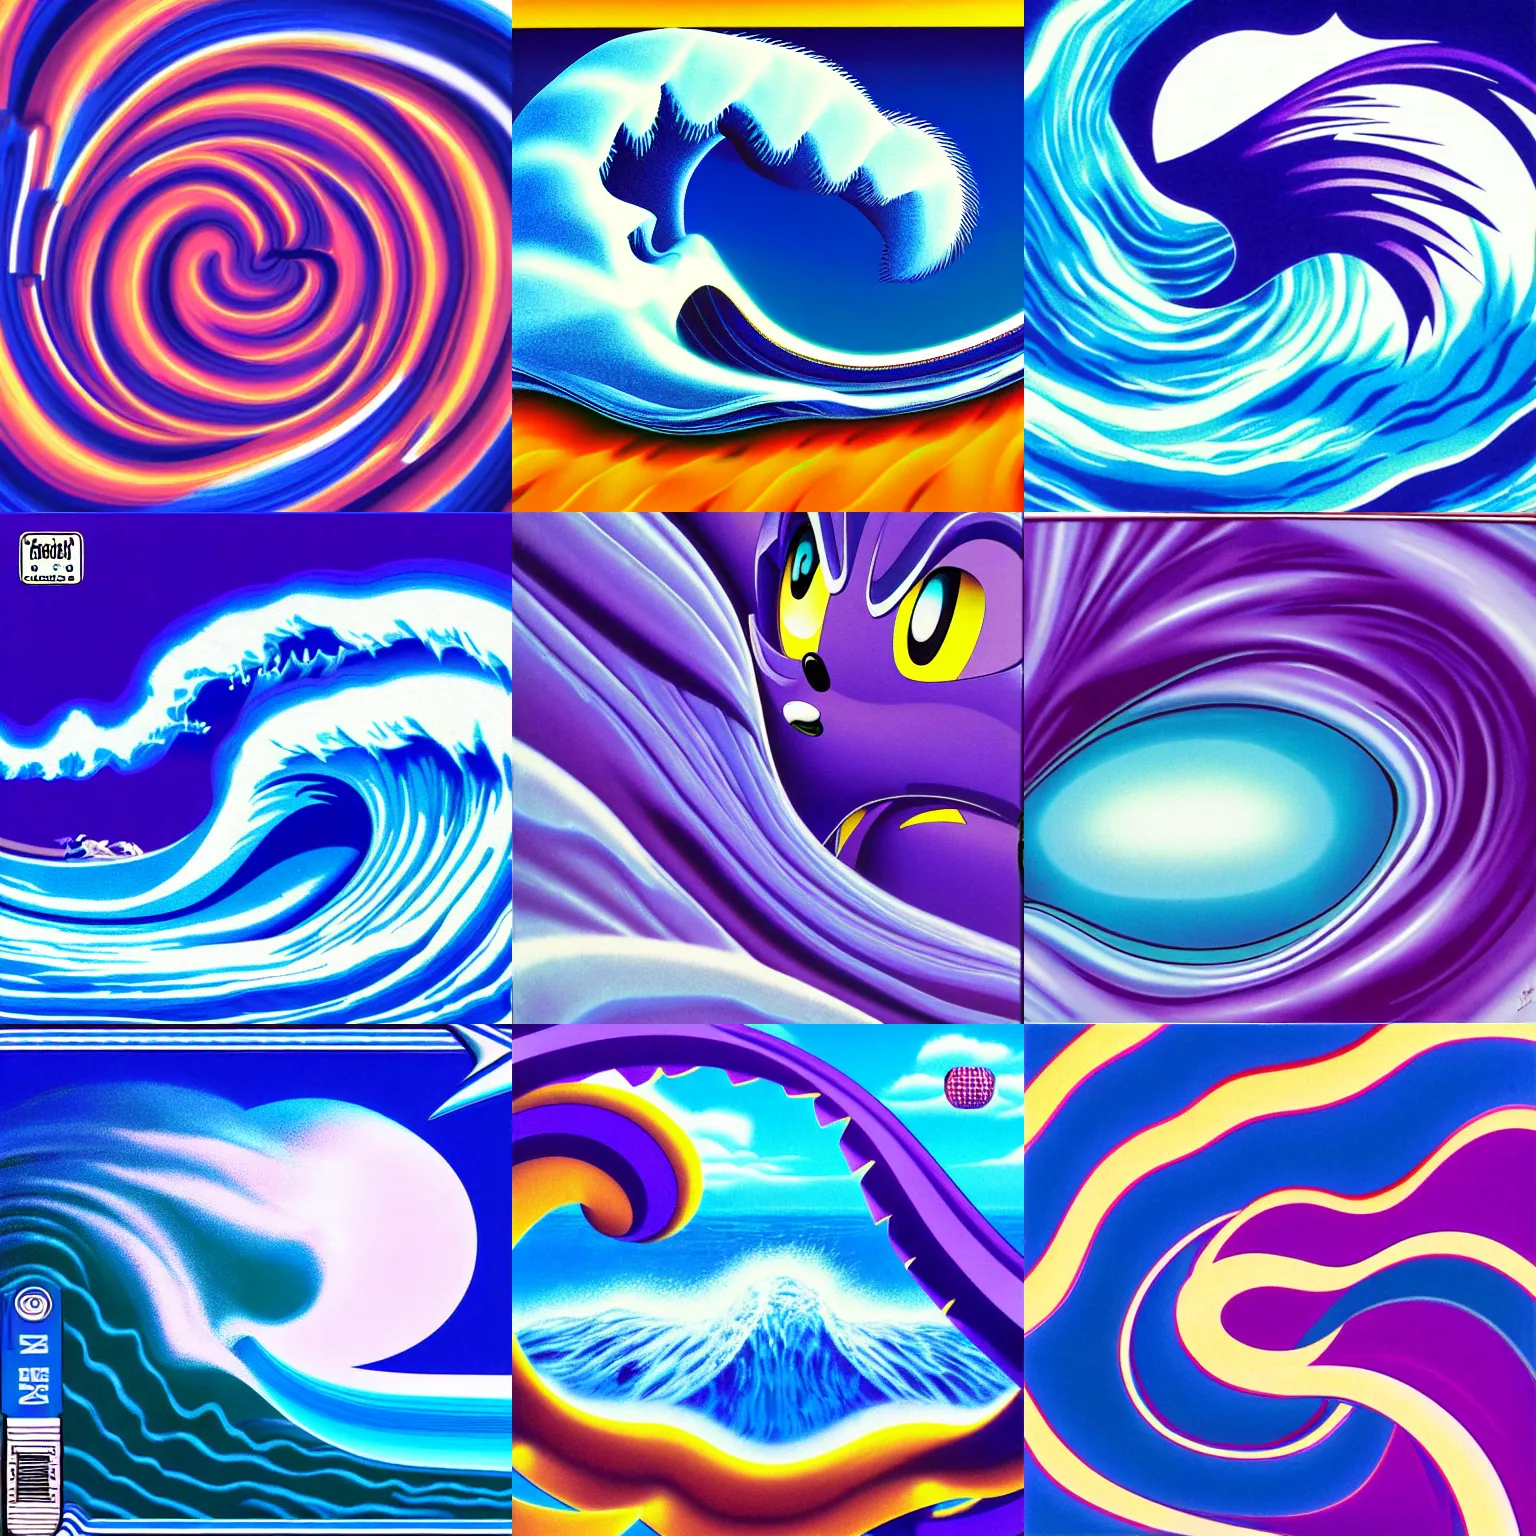 Prompt: surreal, sharp, detailed professional, high quality airbrush art MGMT album cover of a blue cresting ocean wave of sonic the hedgehog, purple checkerboard background, 1990s 1992 Sega Genesis box art